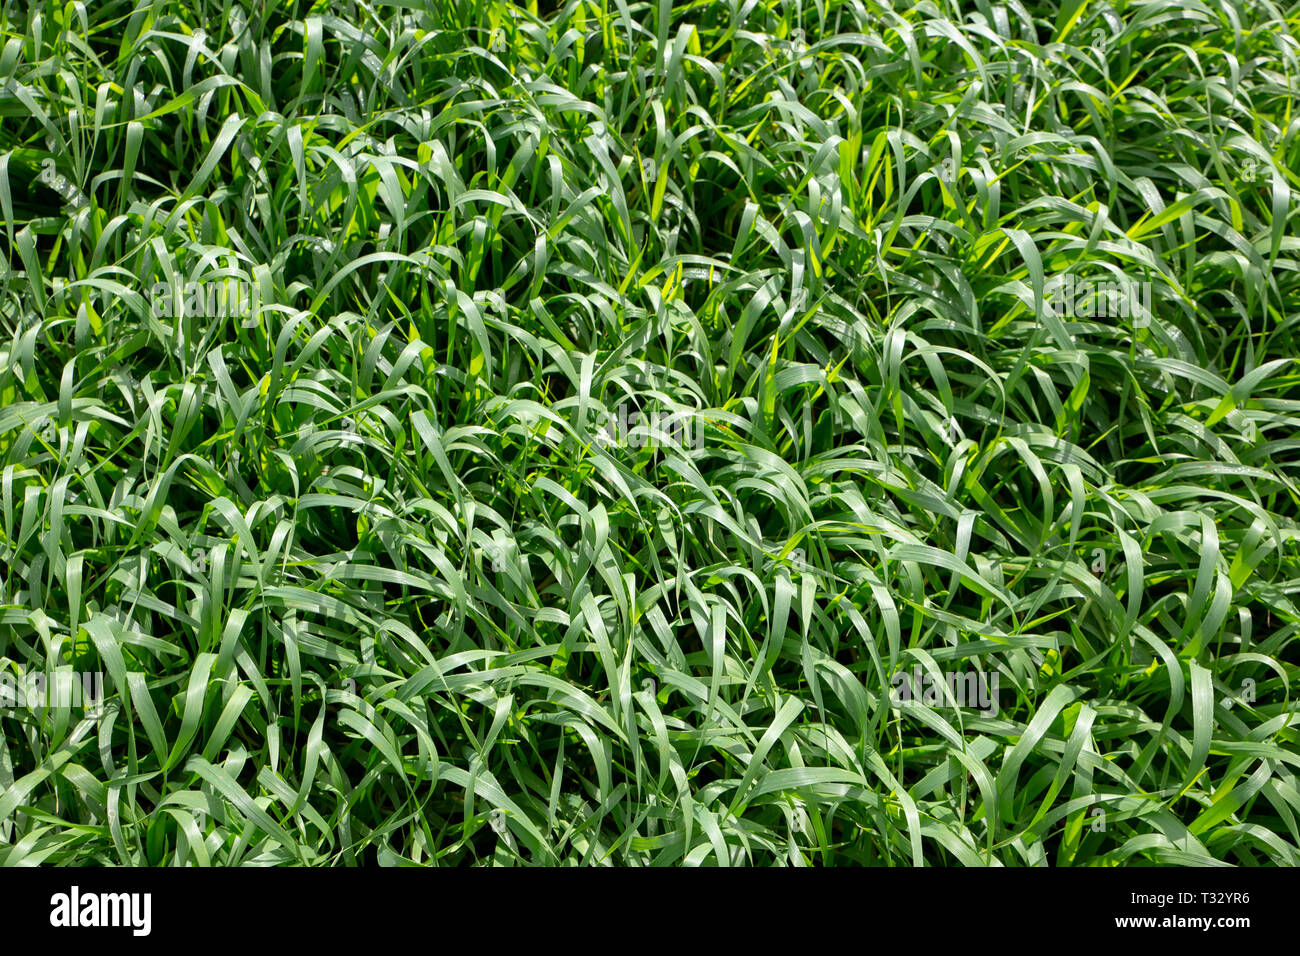 Barley (Hordeum vulgare L.) is a major cereal crop primarily grown for its grain, but it also yields valuable forage that can be grazed, cut for hay o Stock Photo